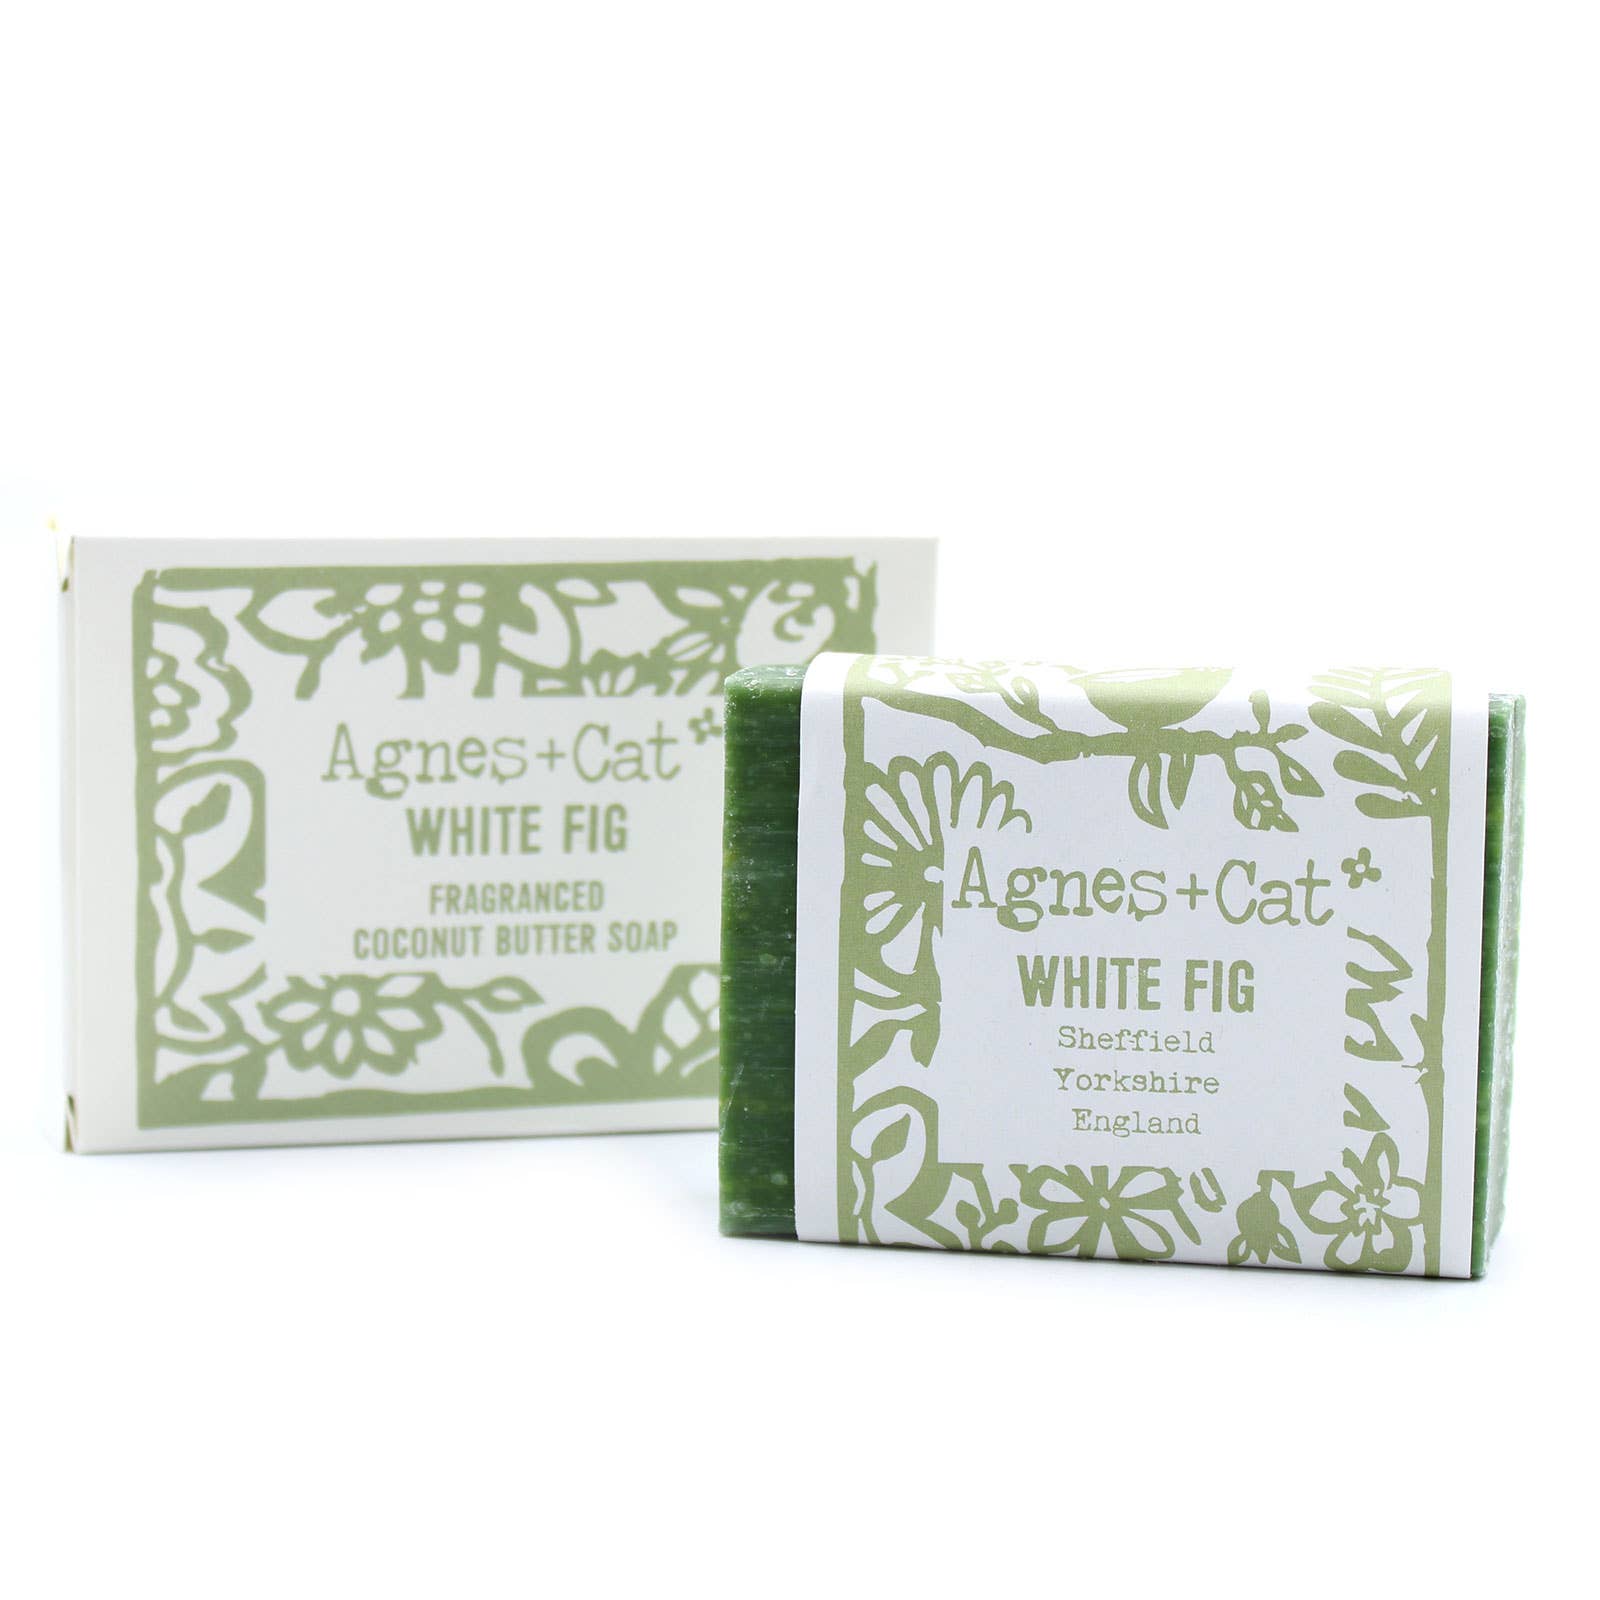 Blooming Marvellous Soap – Sheffield Skincare Company